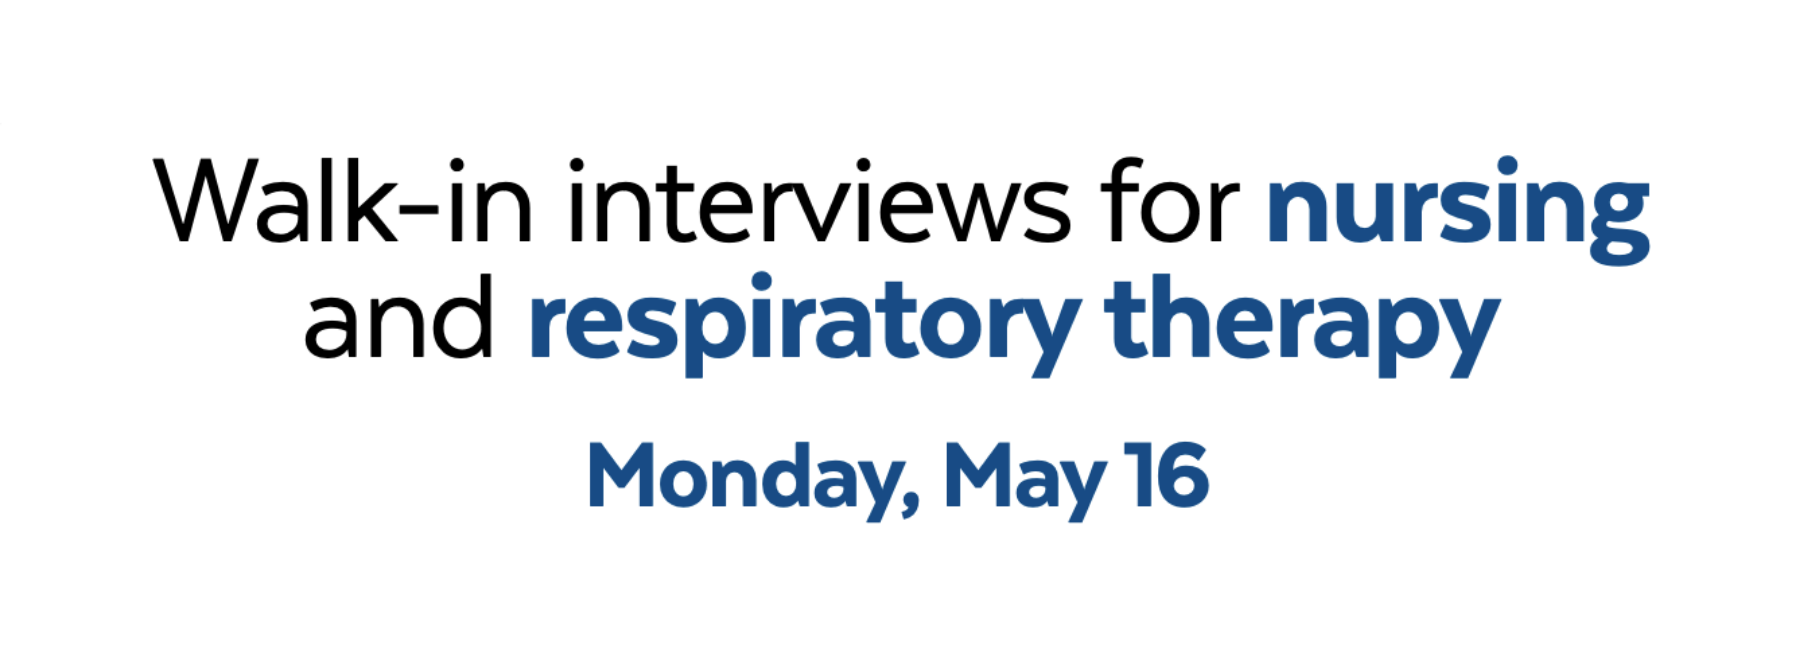 Walk-in interviews for nursing and respiratory therapy Monday, May 16